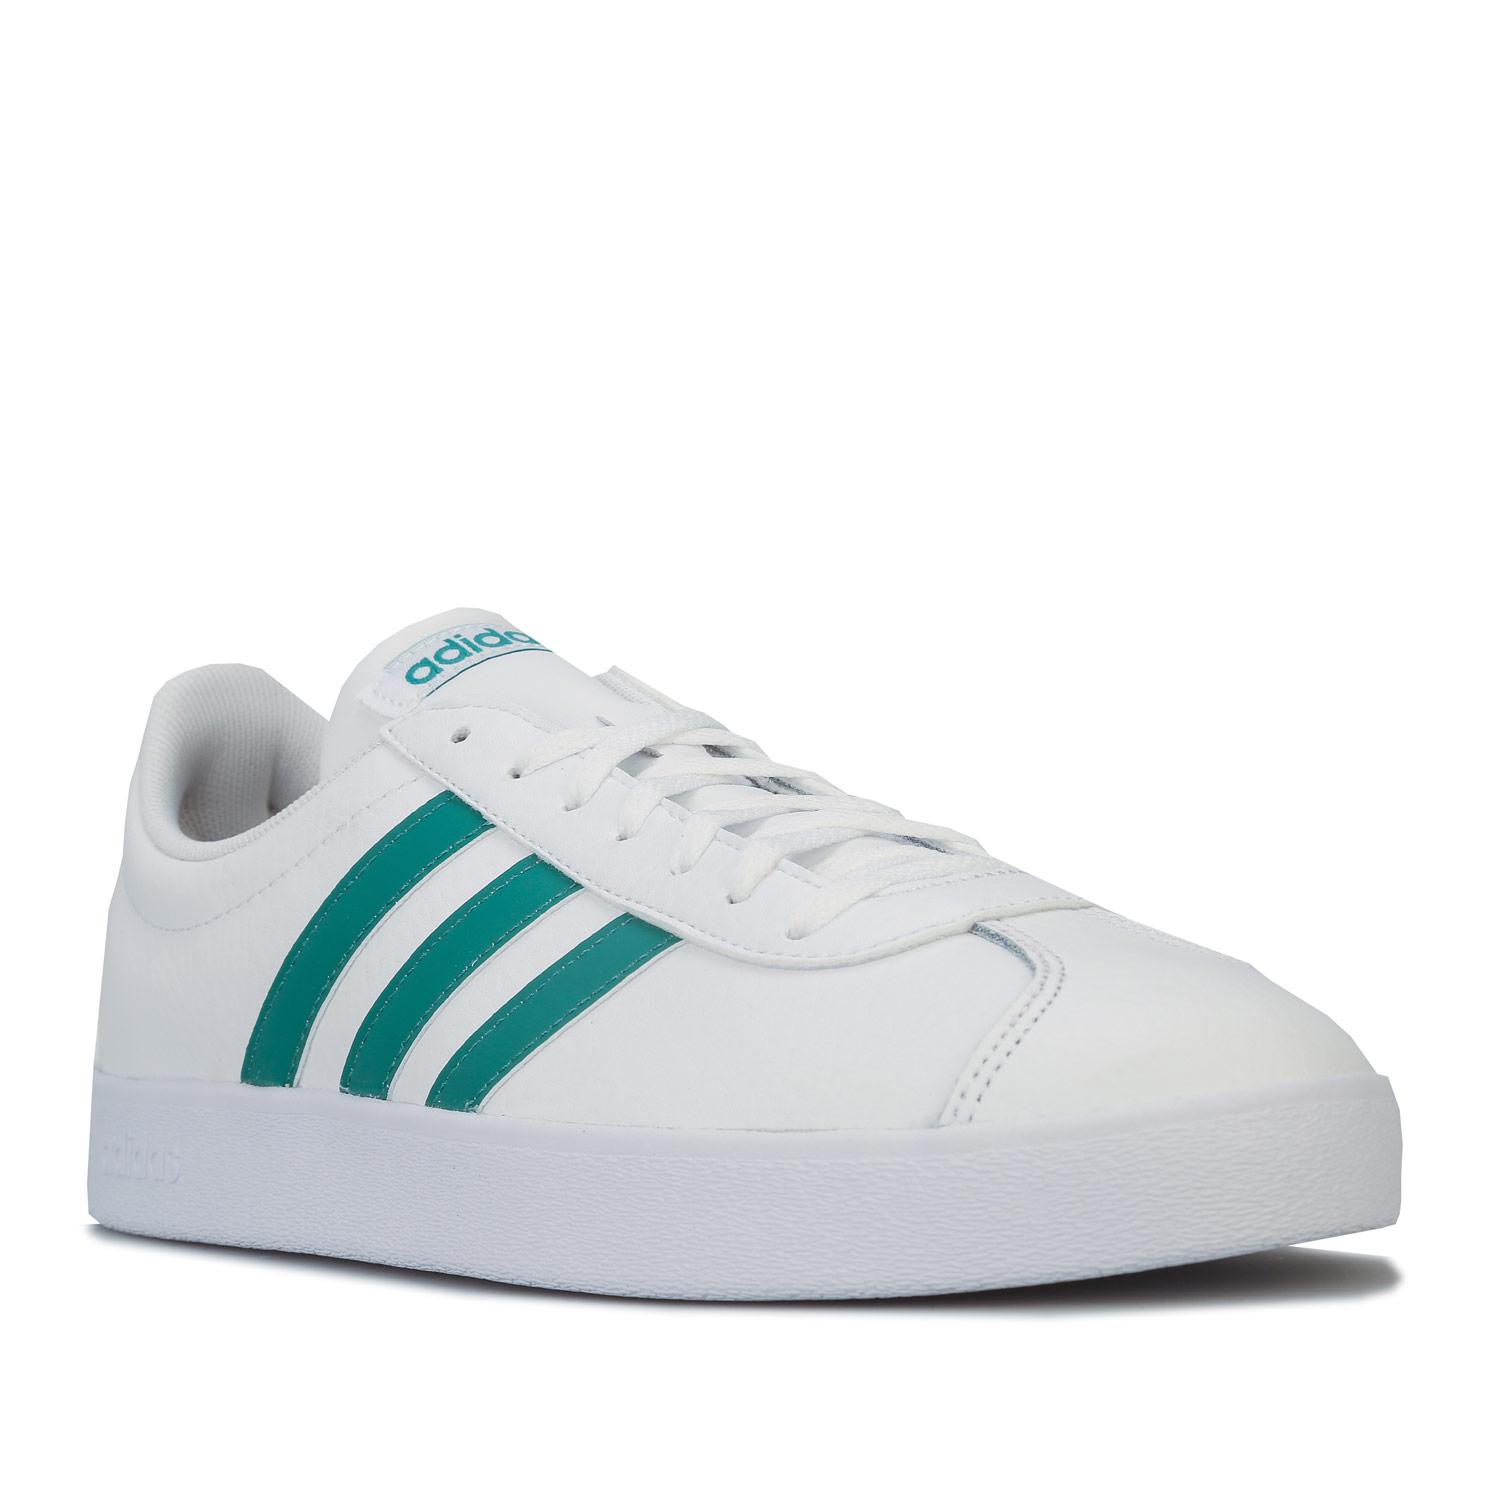 adidas Vl Court 2.0 Trainers in White for Men - Lyst